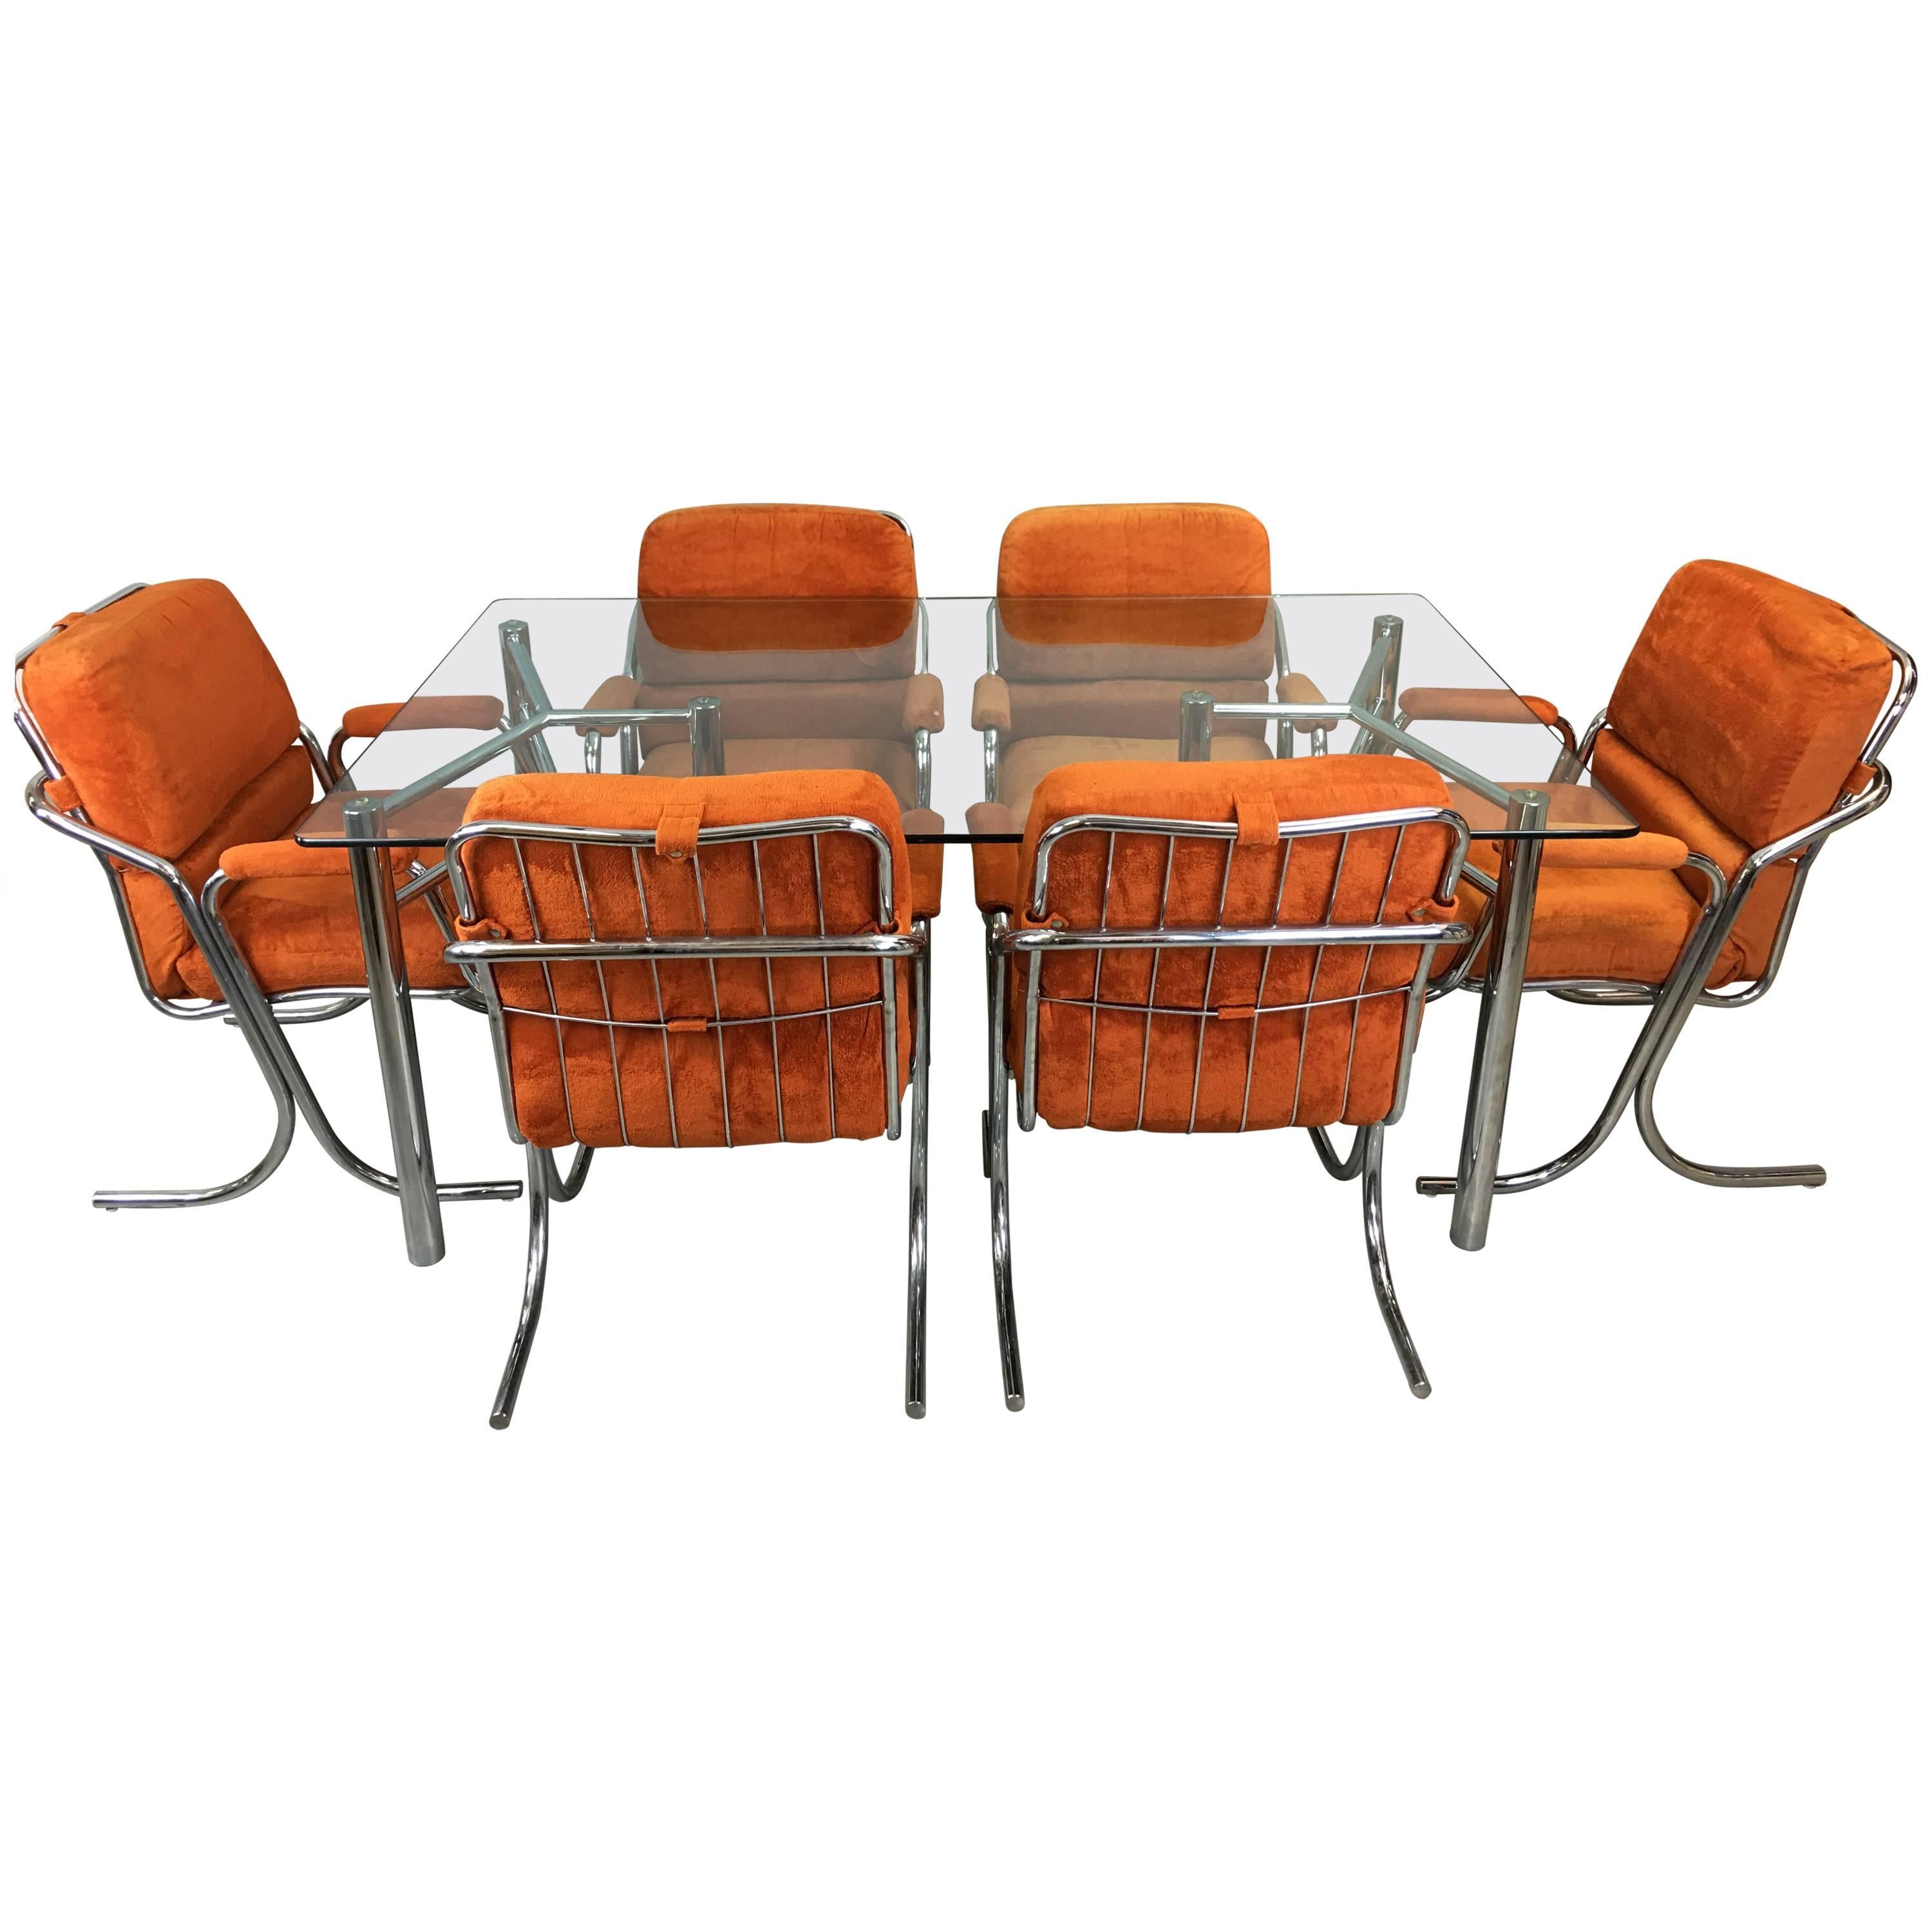 Cal-Style Dining Table and Six Chairs